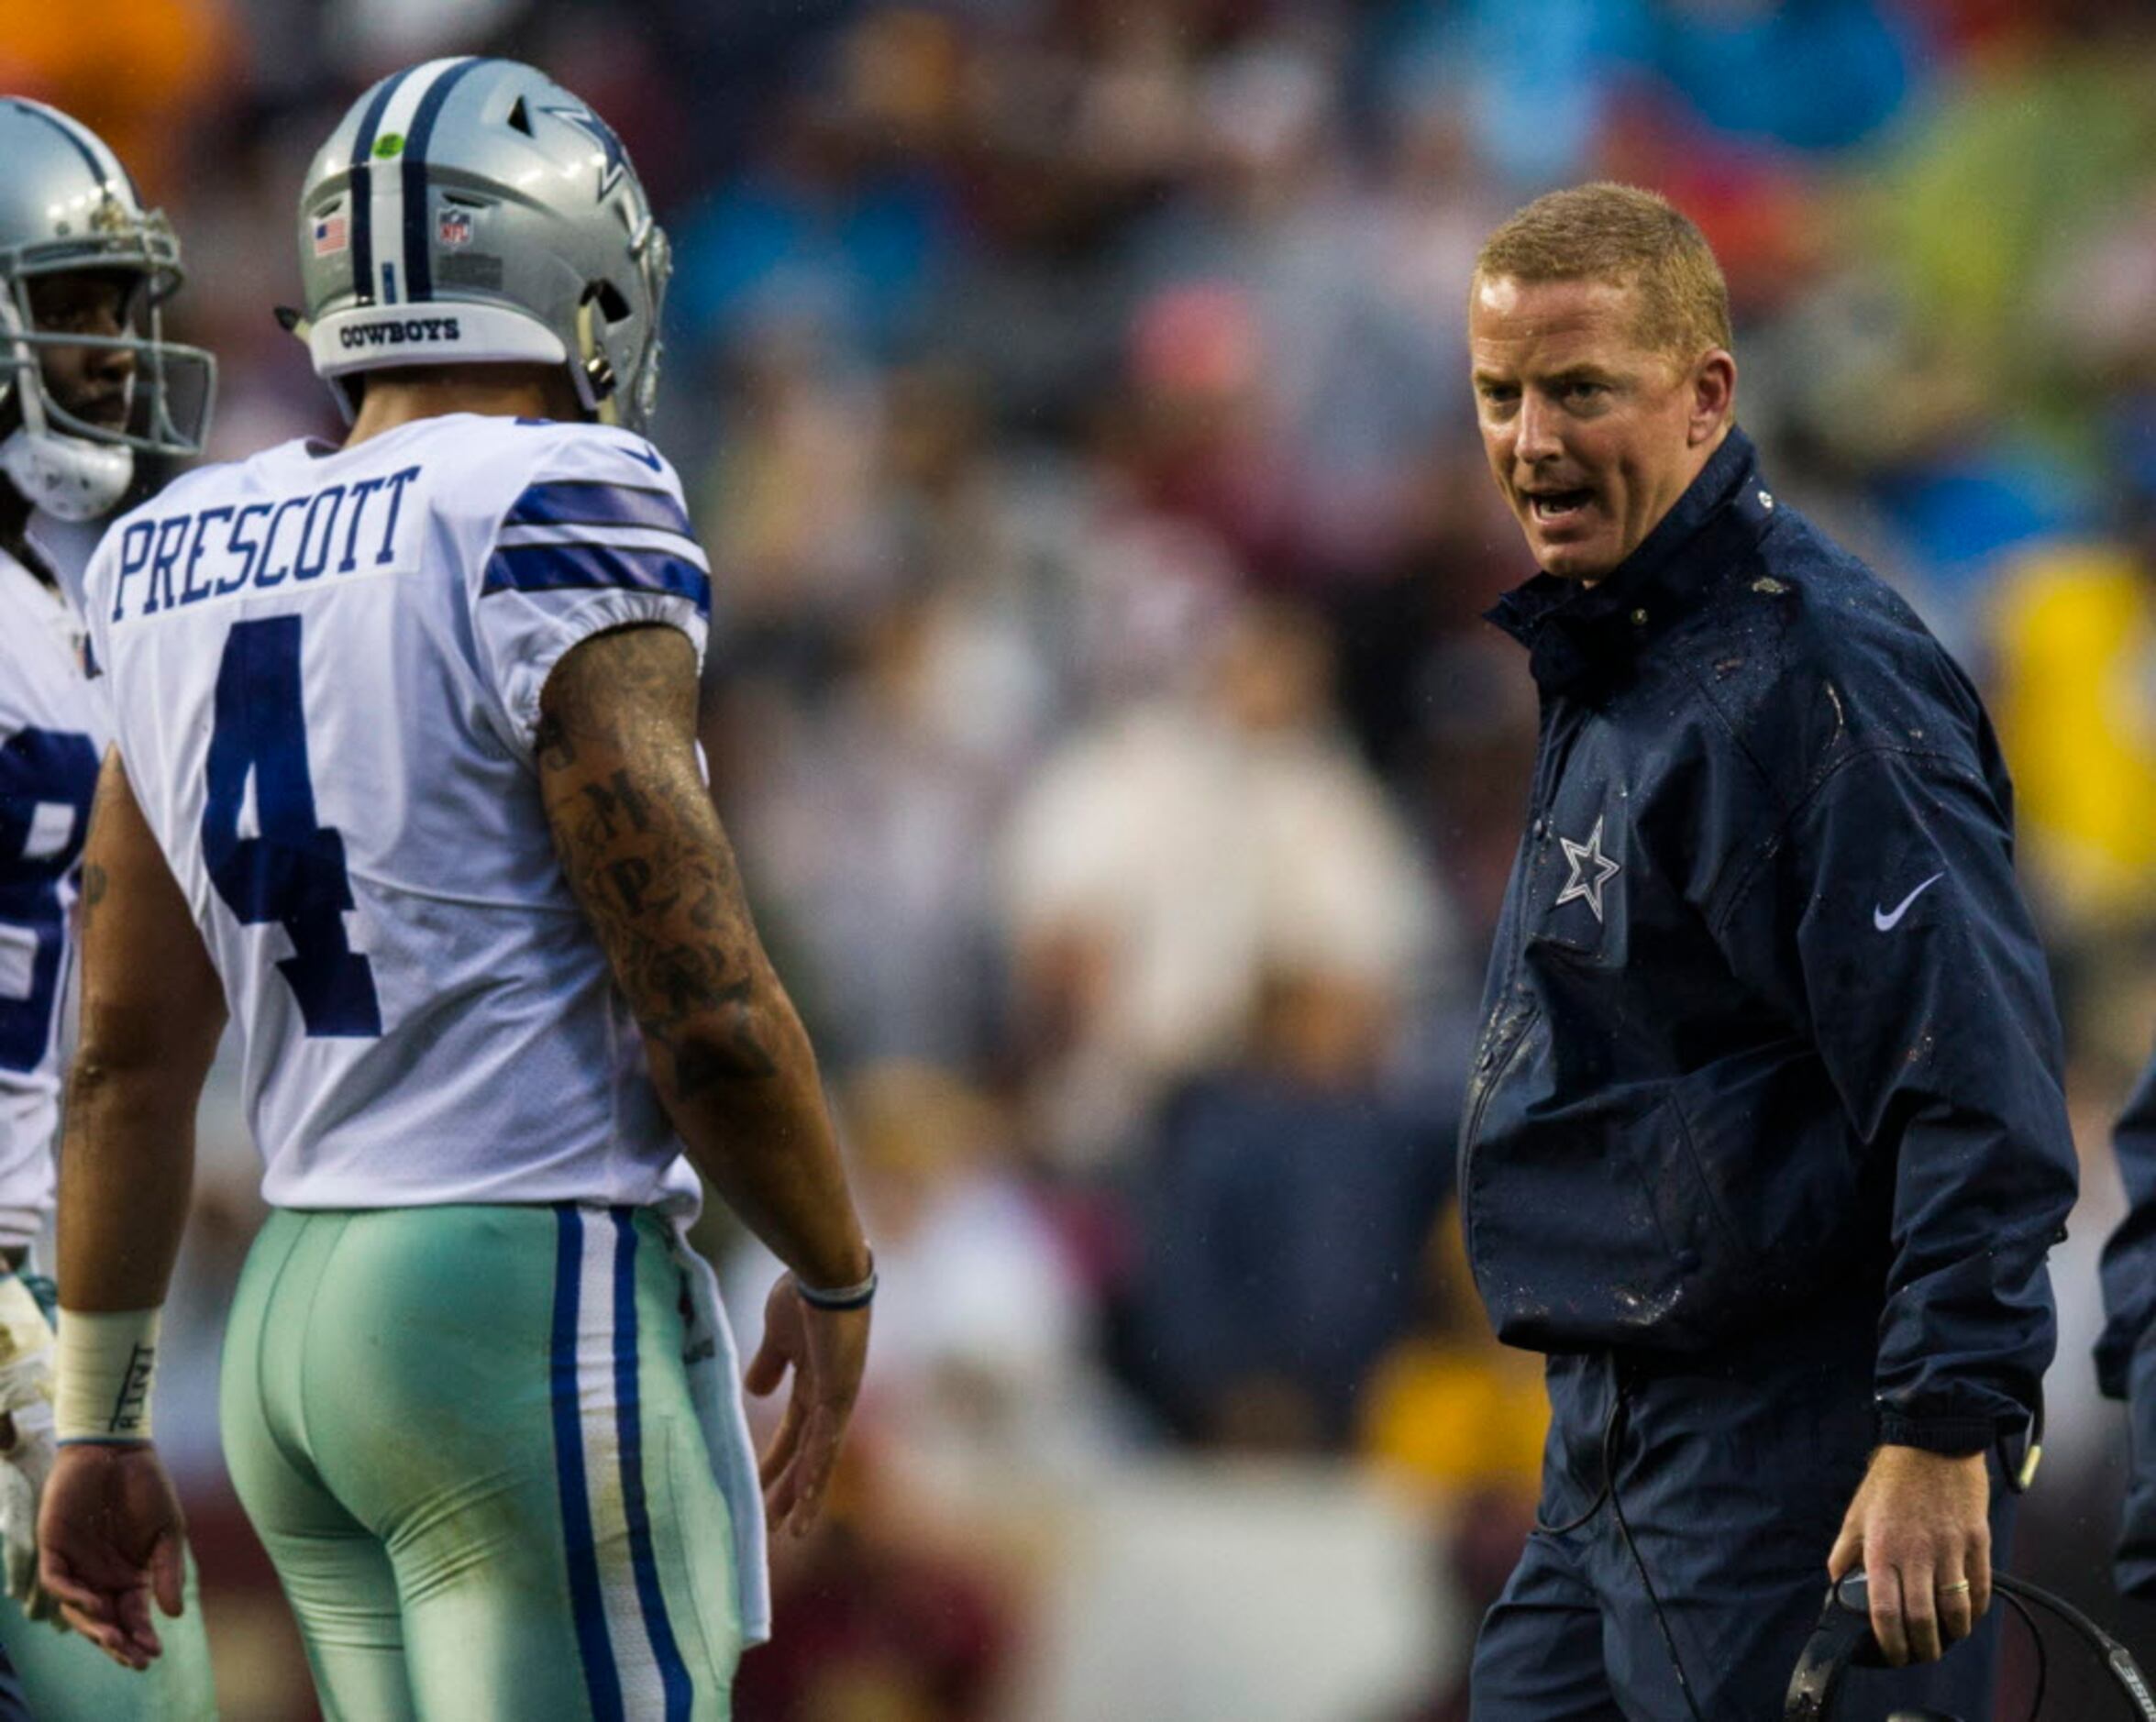 Jones frustrated as Cowboys fall short in playoffs again